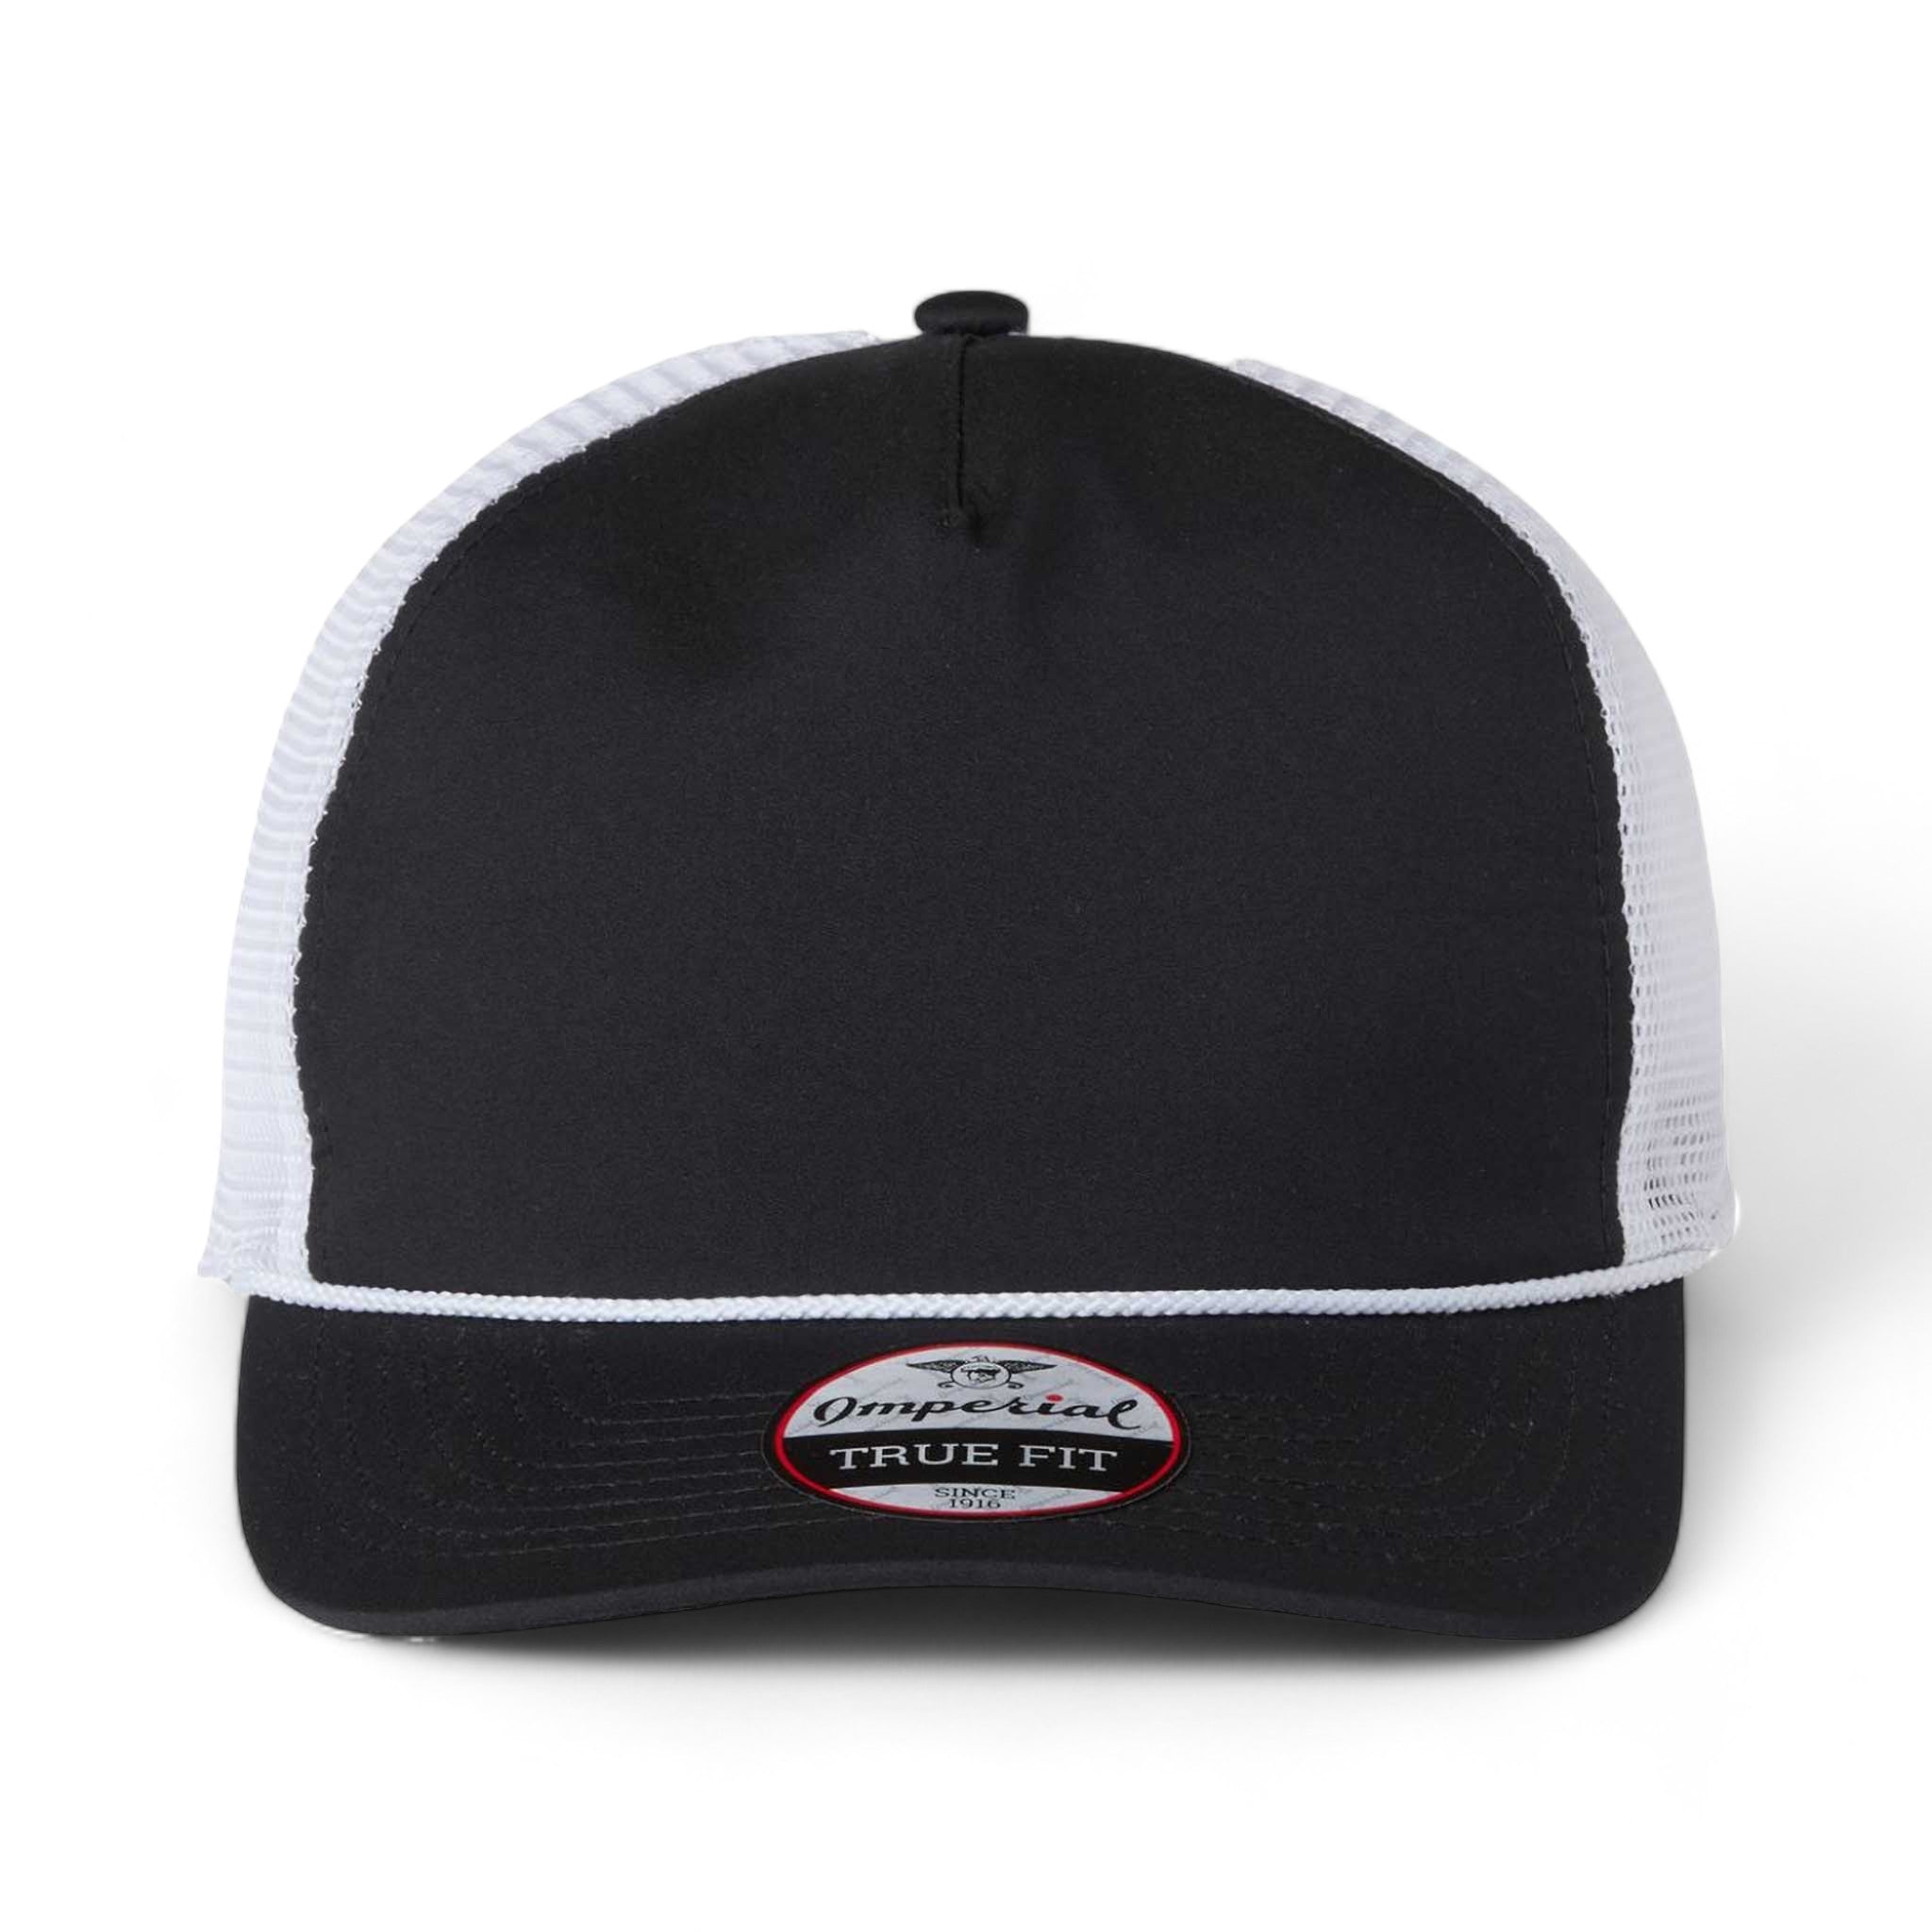 Front view of Imperial 5055 custom hat in black, white and white